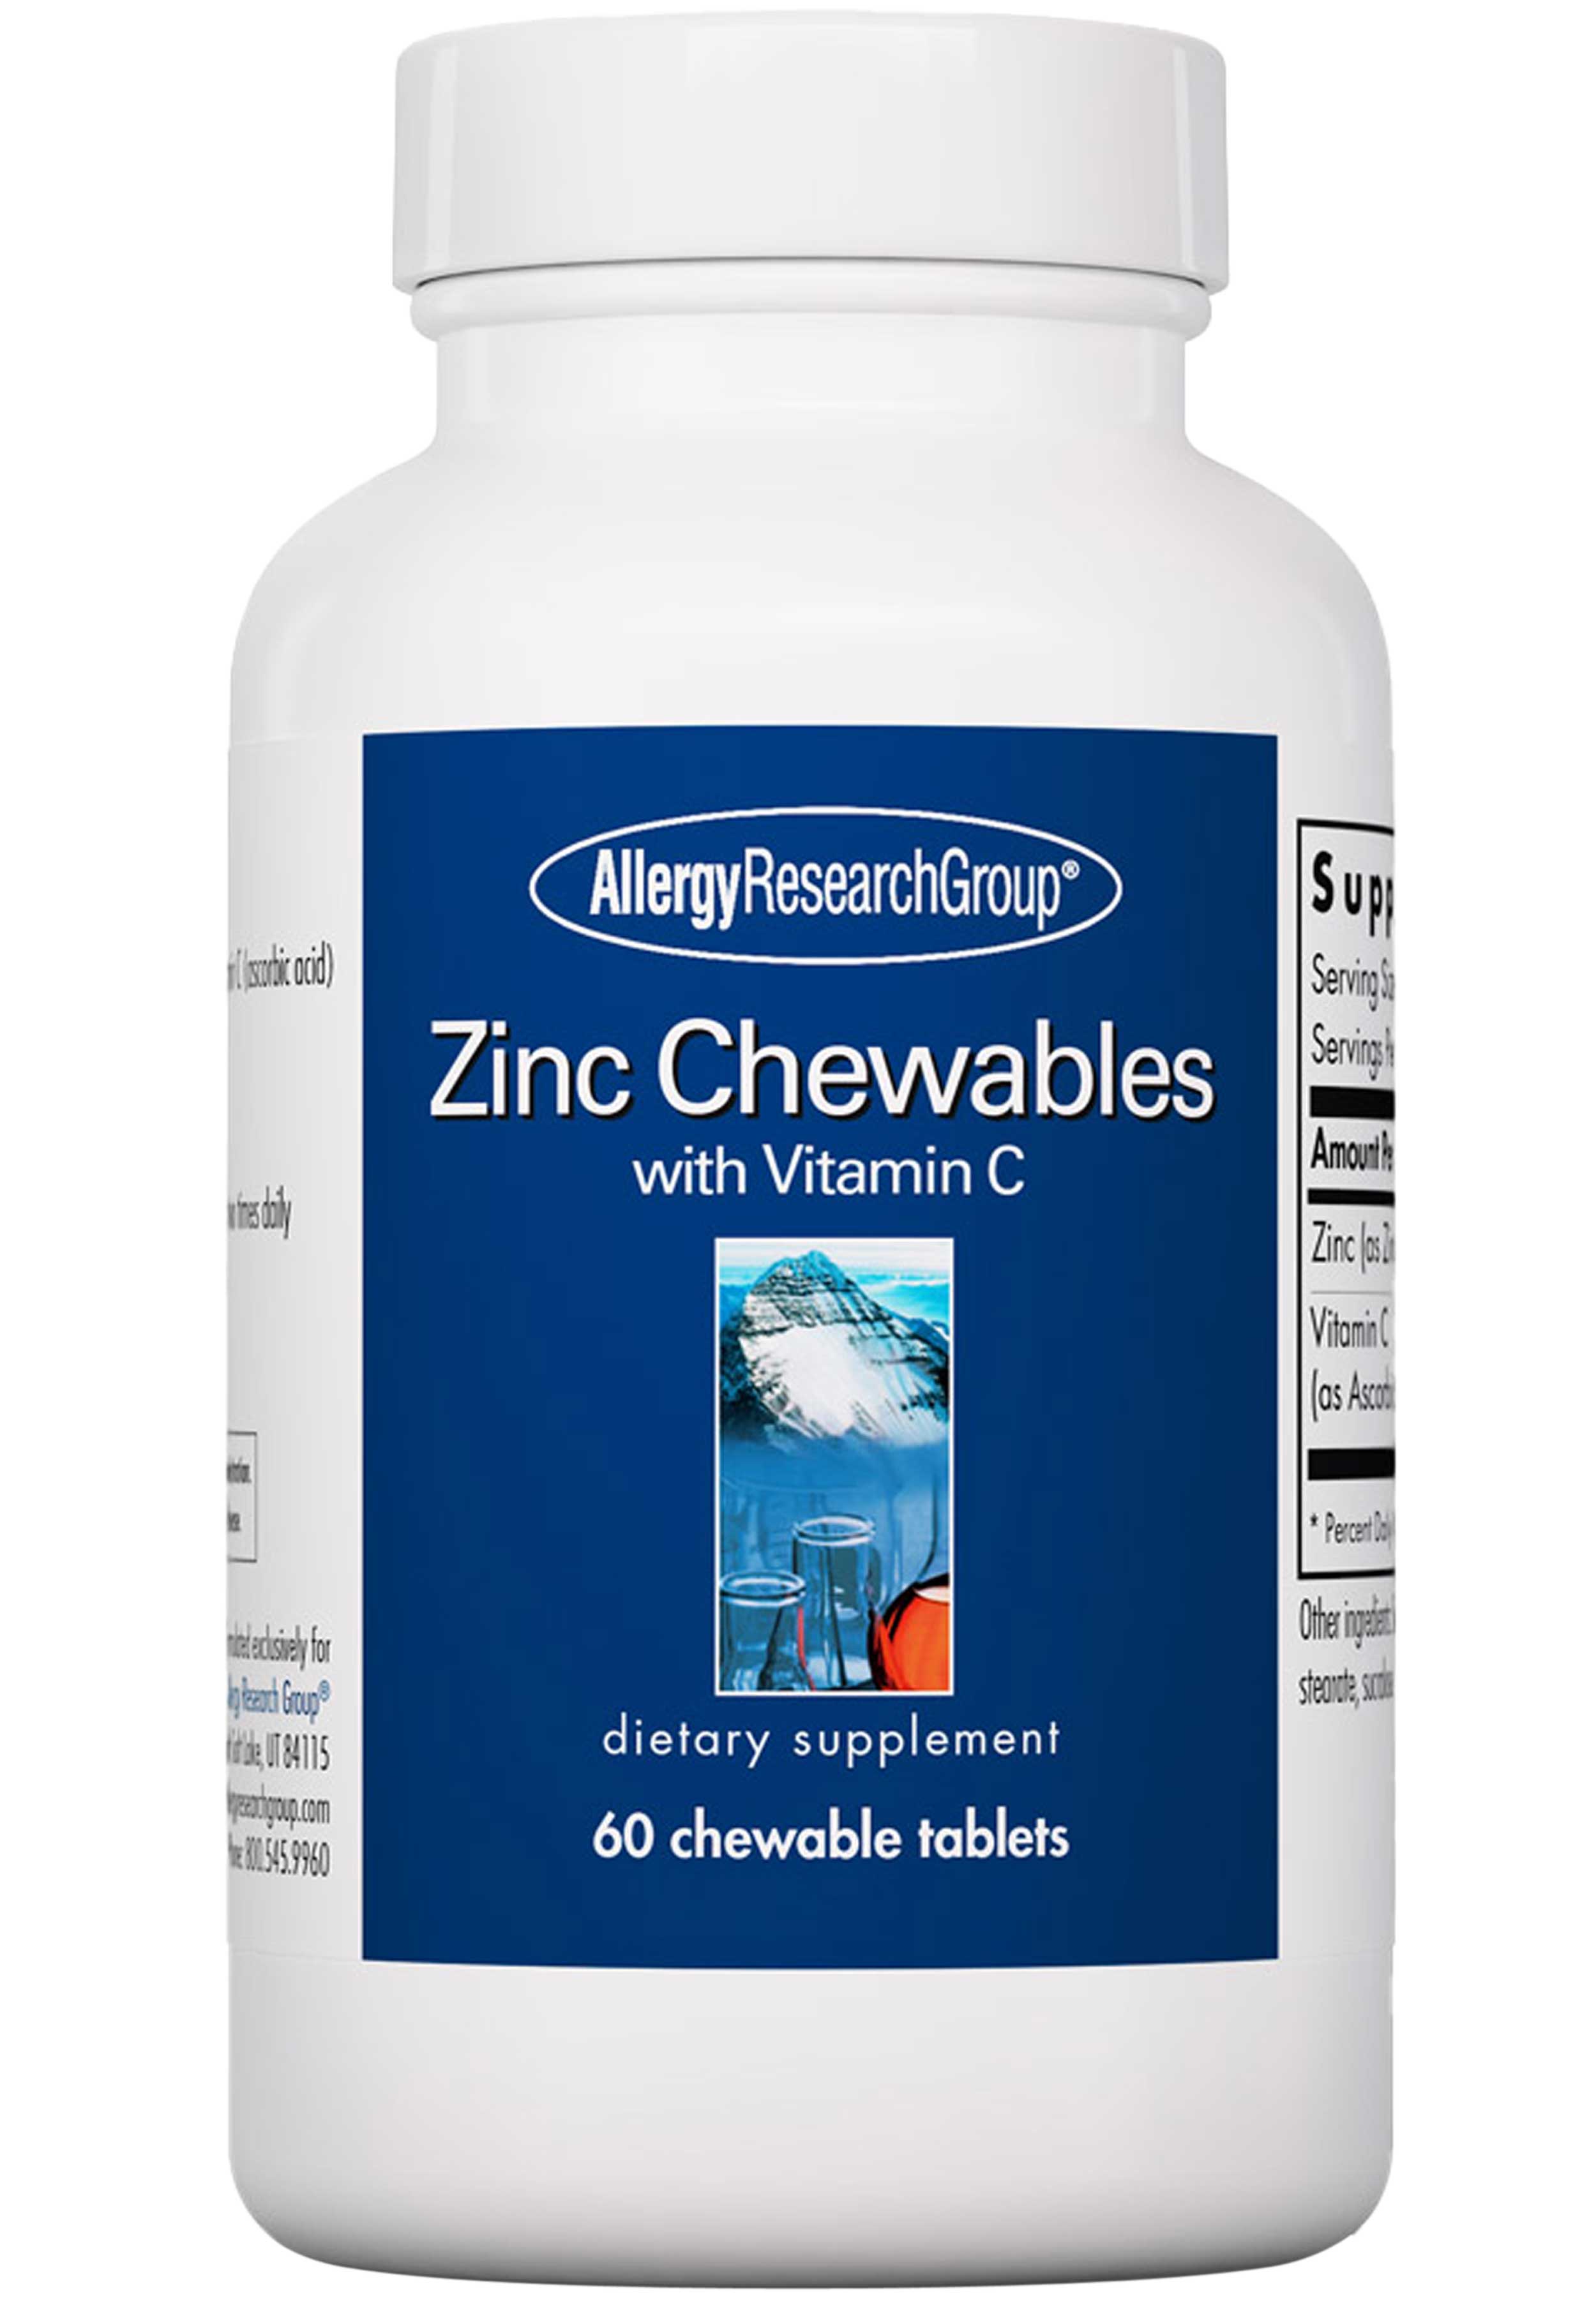 Allergy Research Group Zinc Chewables with Vitamin C